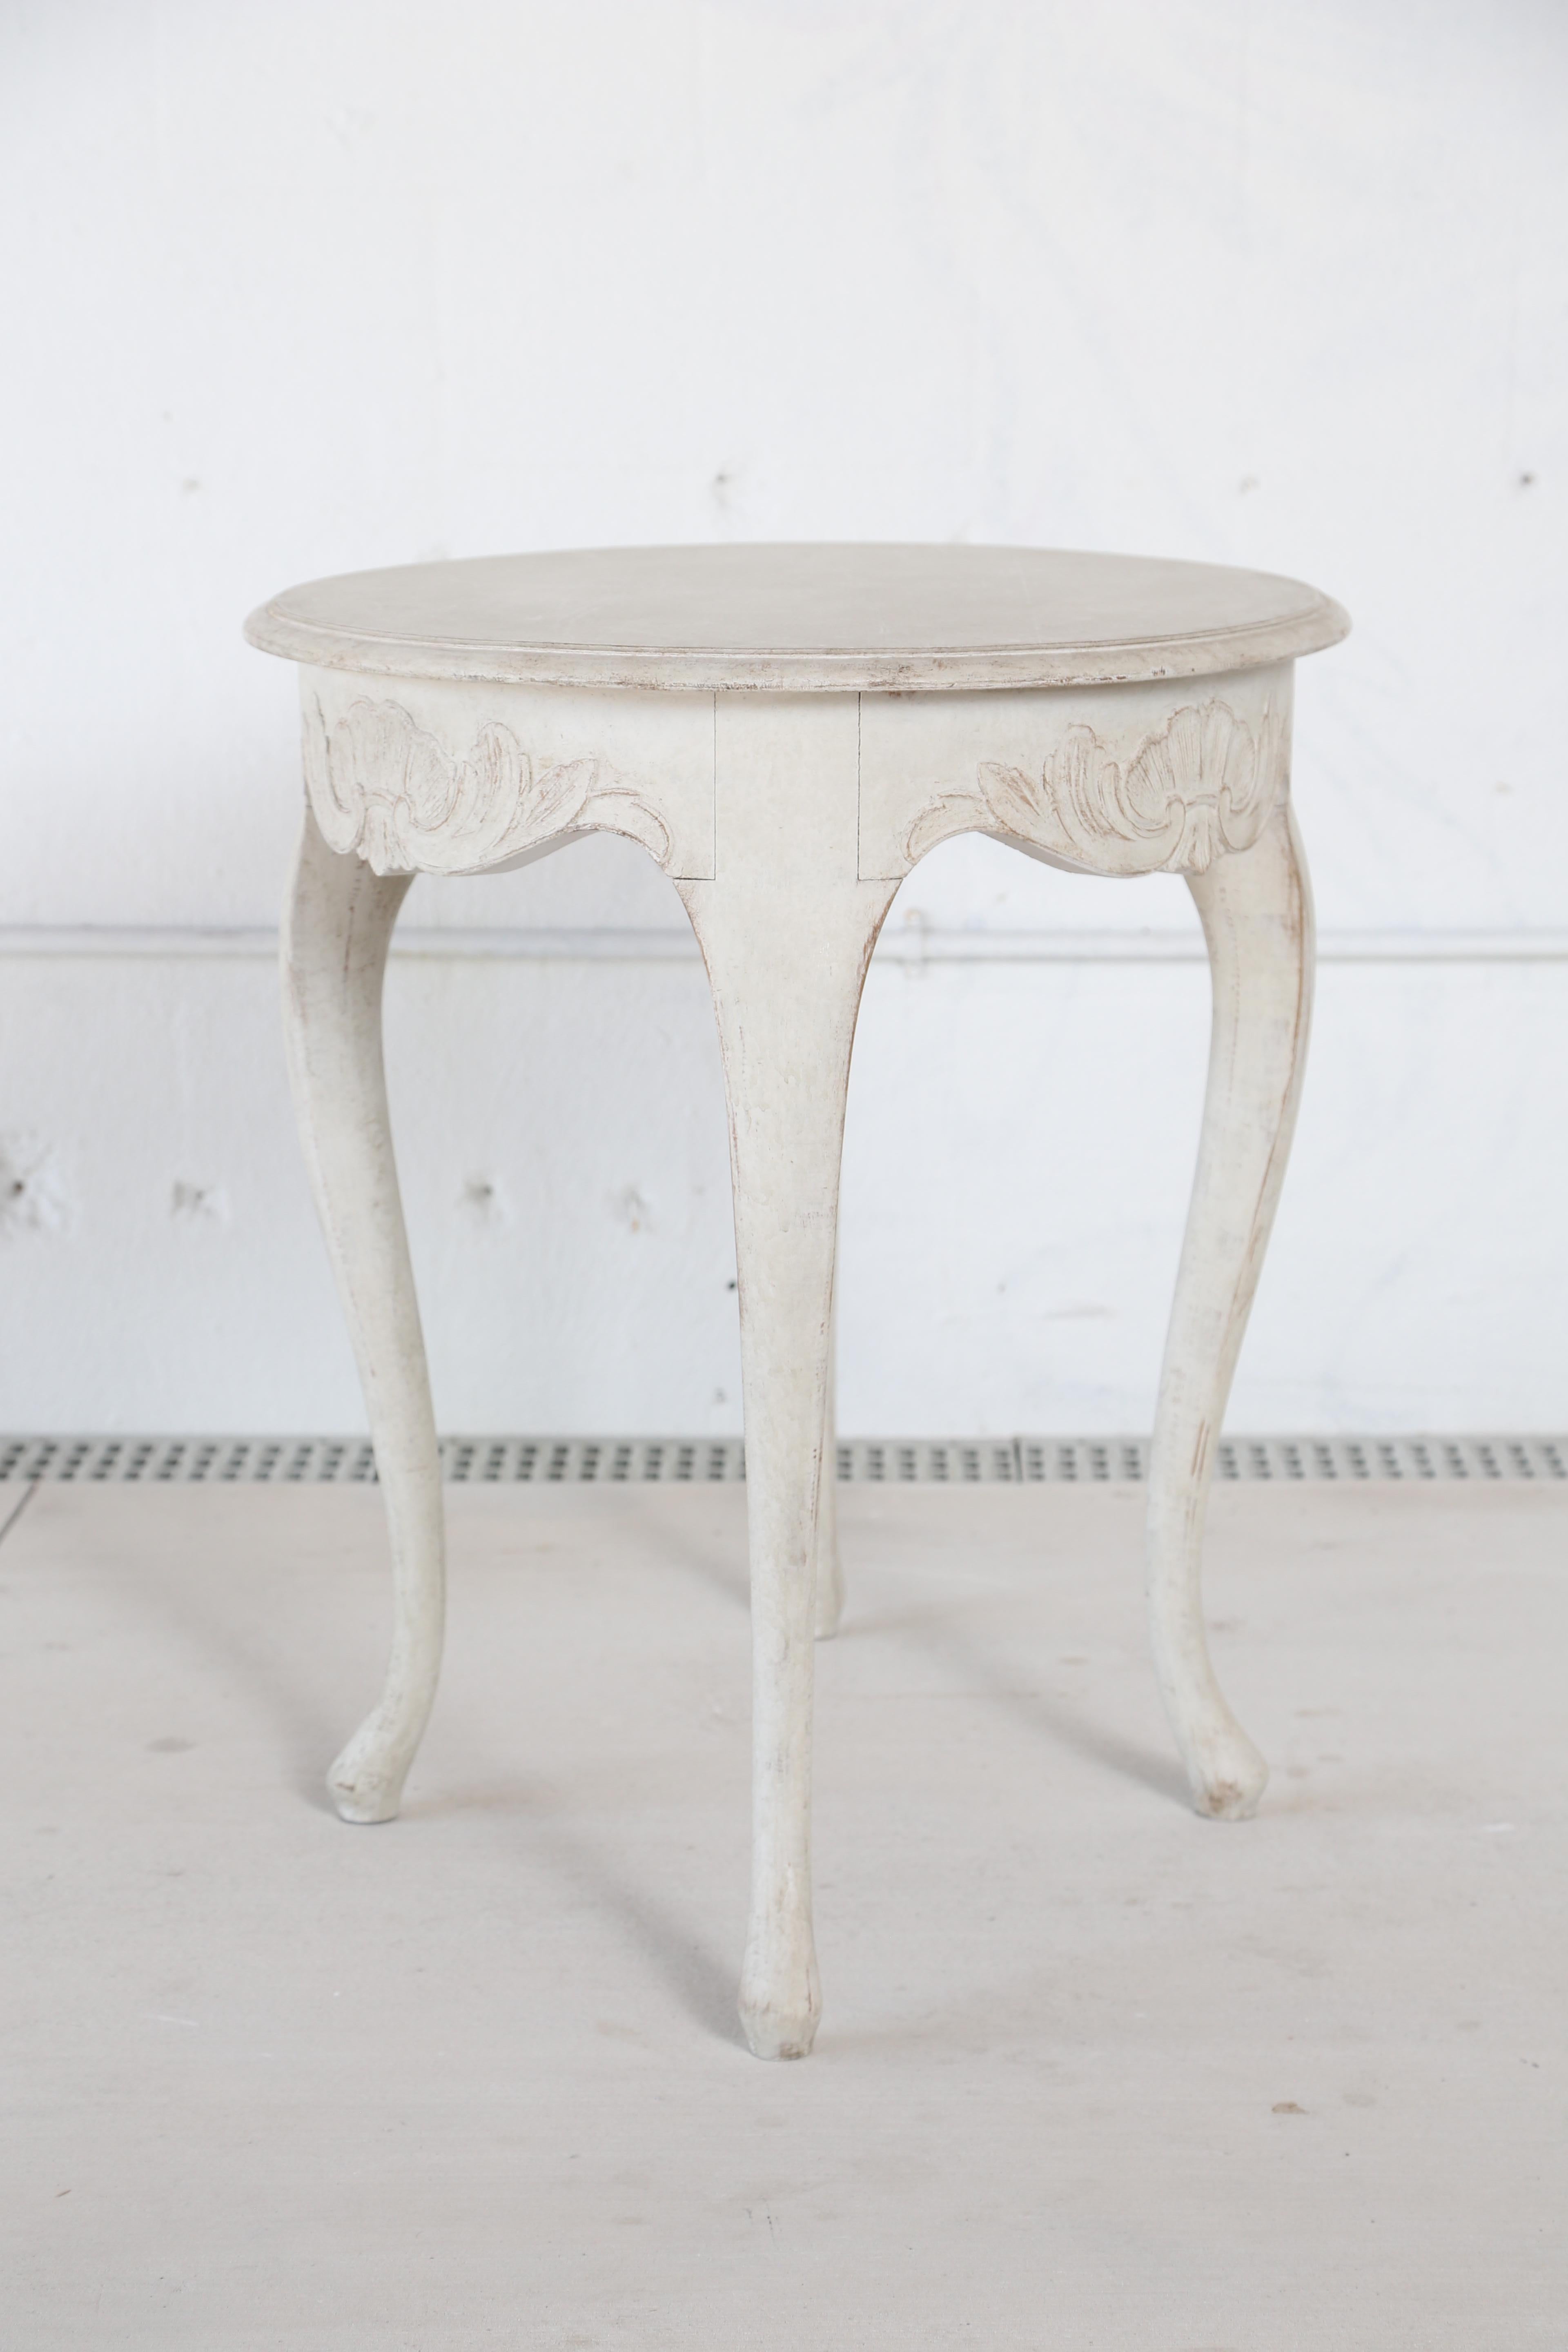 Antique Swedish Rococo Style Painted Oval Table 19th Century For Sale 4